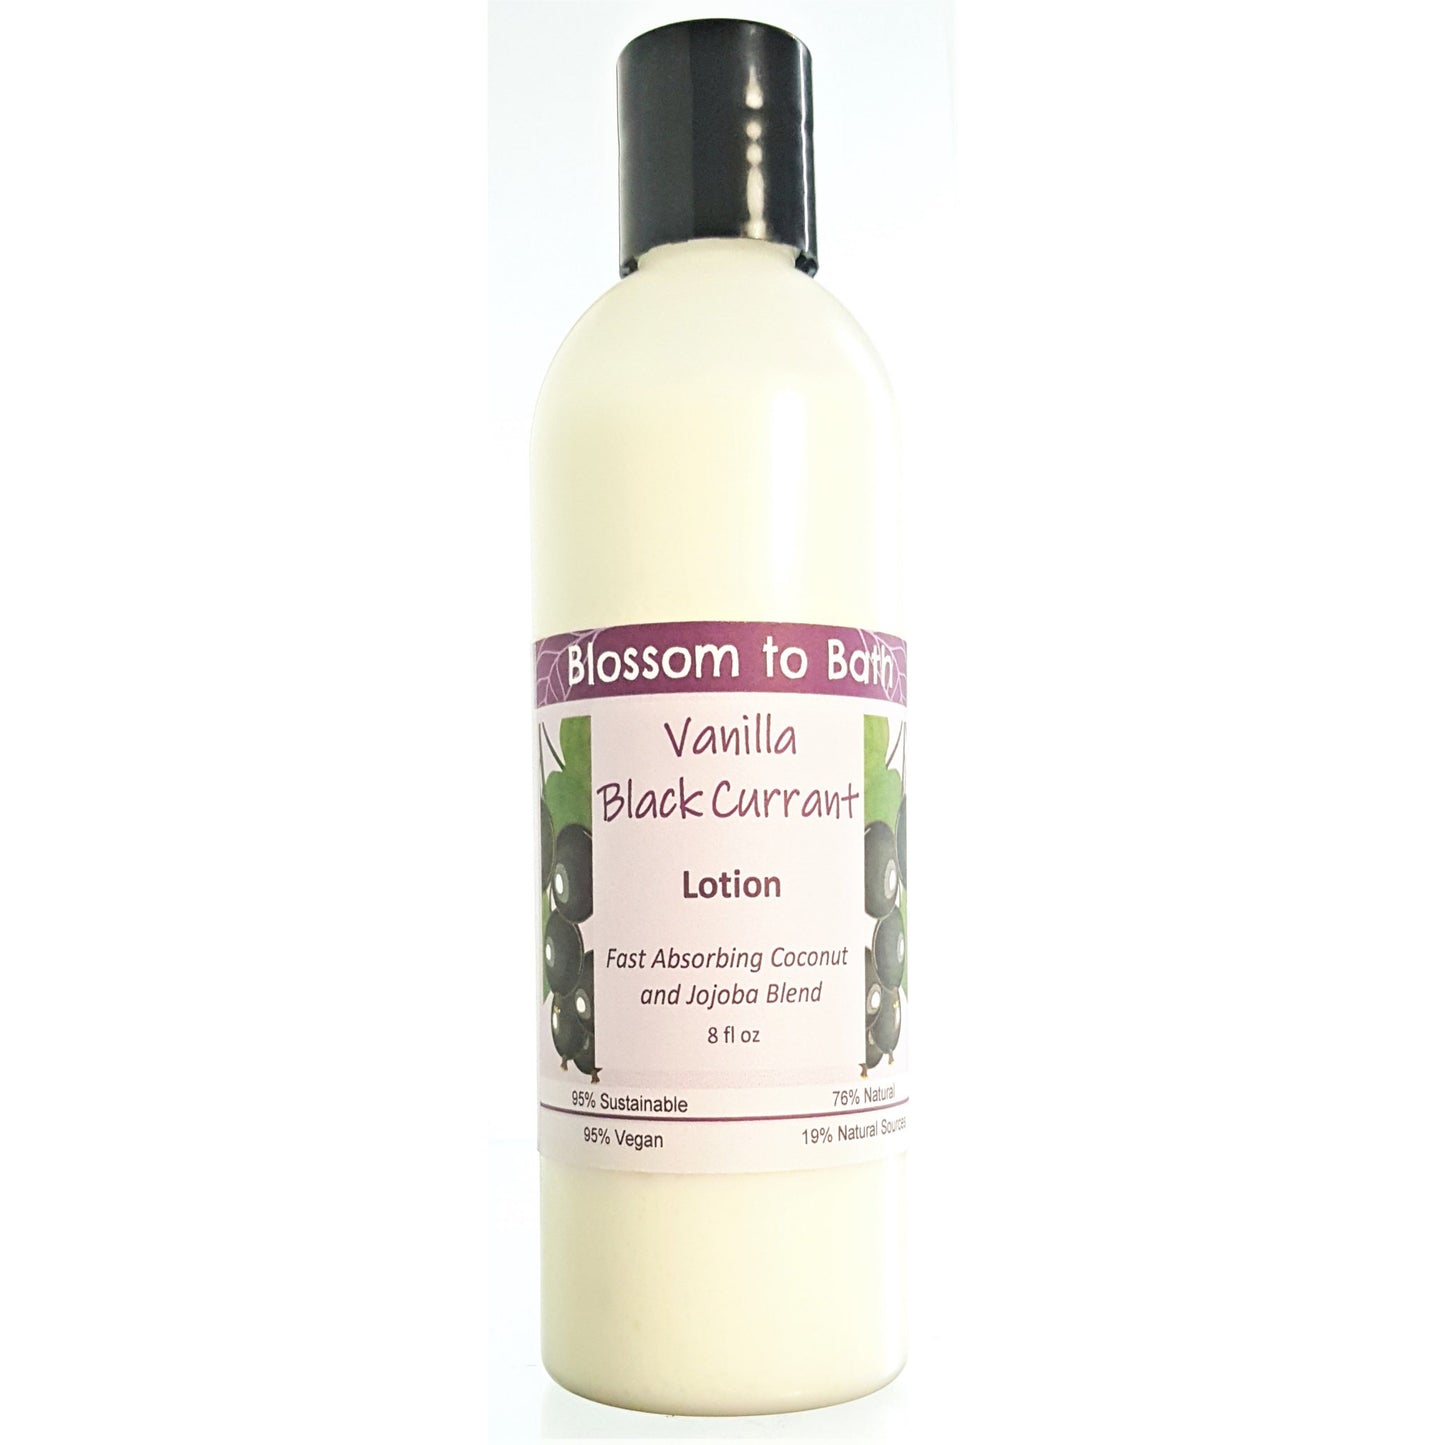 Buy Blossom to Bath Vanilla Black Currant Lotion from Flowersong Soap Studio.  Daily moisture luxury that soaks in quickly made with organic oils and butters that soften and smooth the skin  A sensuous rich berry scent with a hint of vanilla and a twist of freshness.